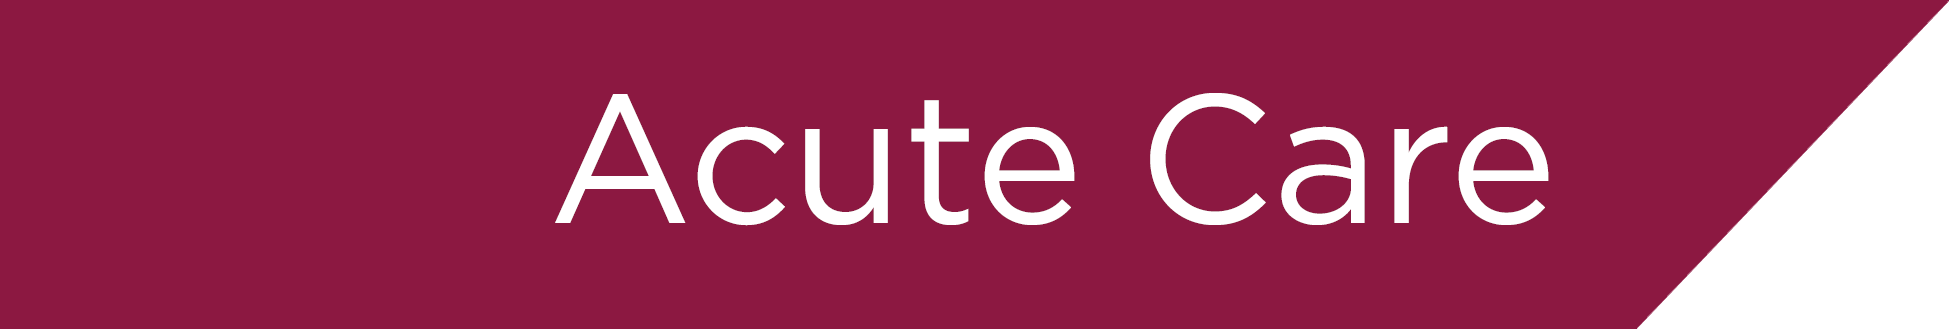 Banner with text "Acute Care"